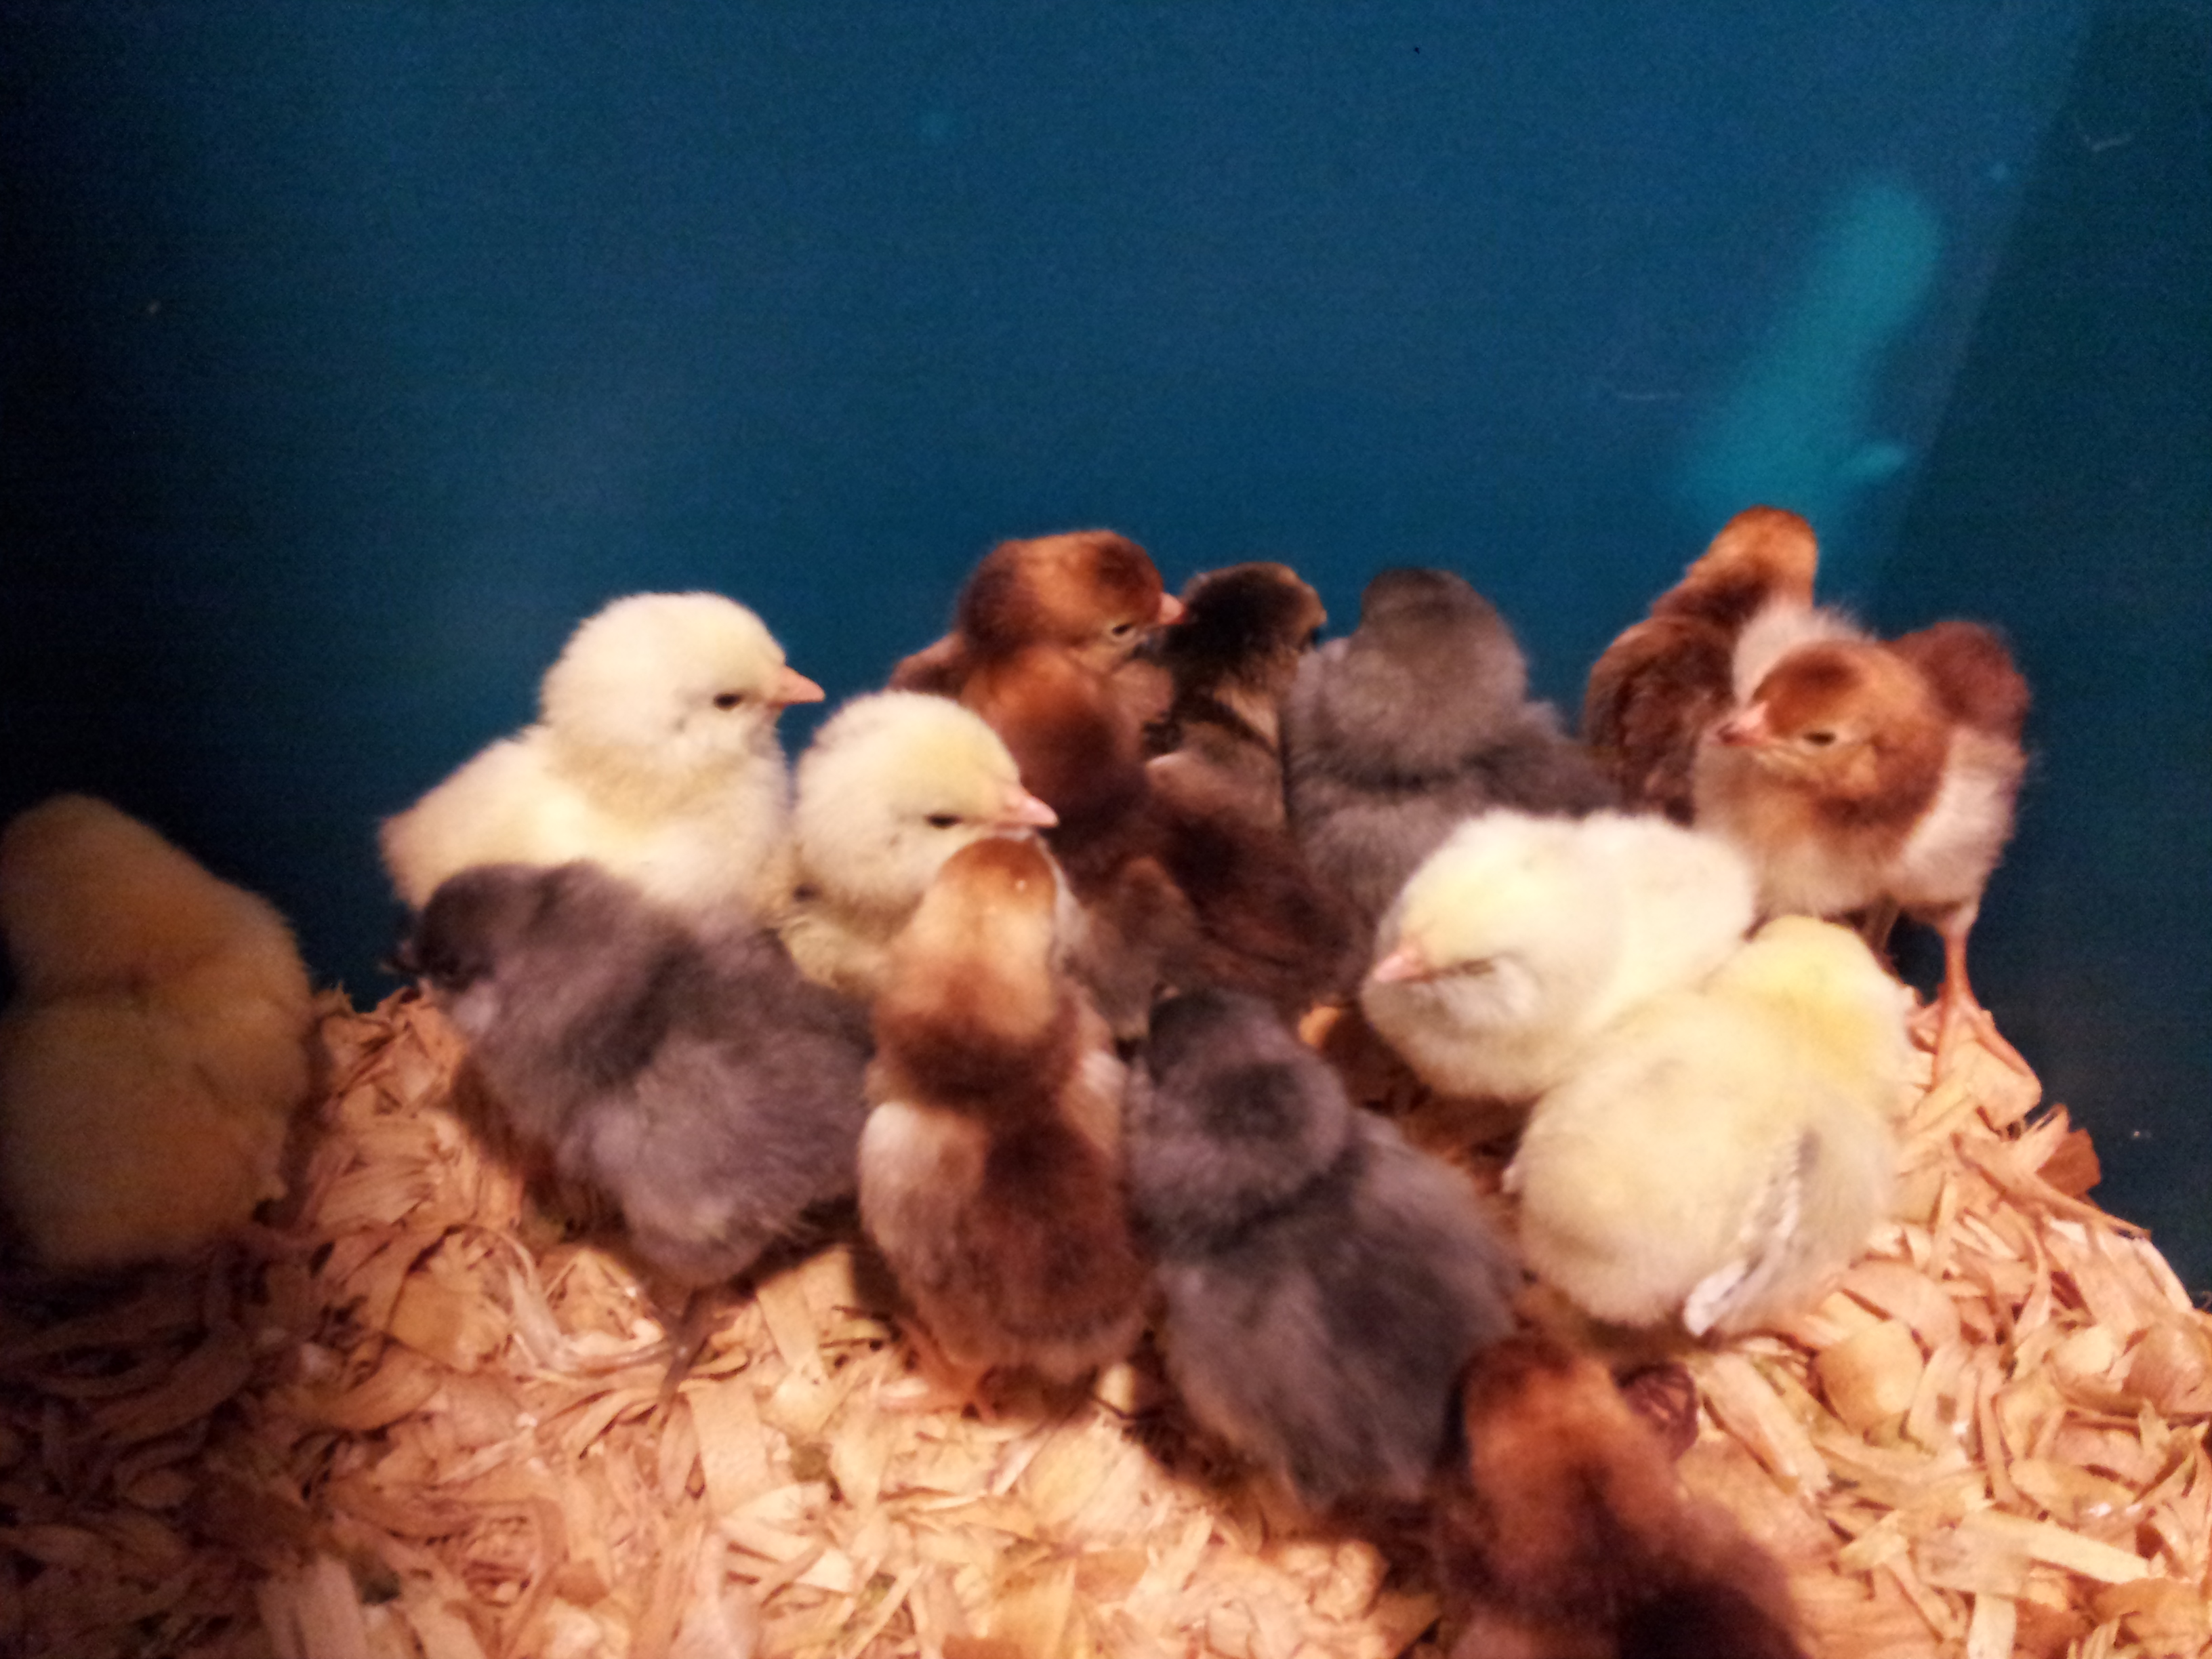 Closer up of new bantams from Cackle Hatchery. 8 EEes colored as 3 blue-gray ones, 5 yellow (1 with stripes), and 1 medium brown (not striped), 7 RIR